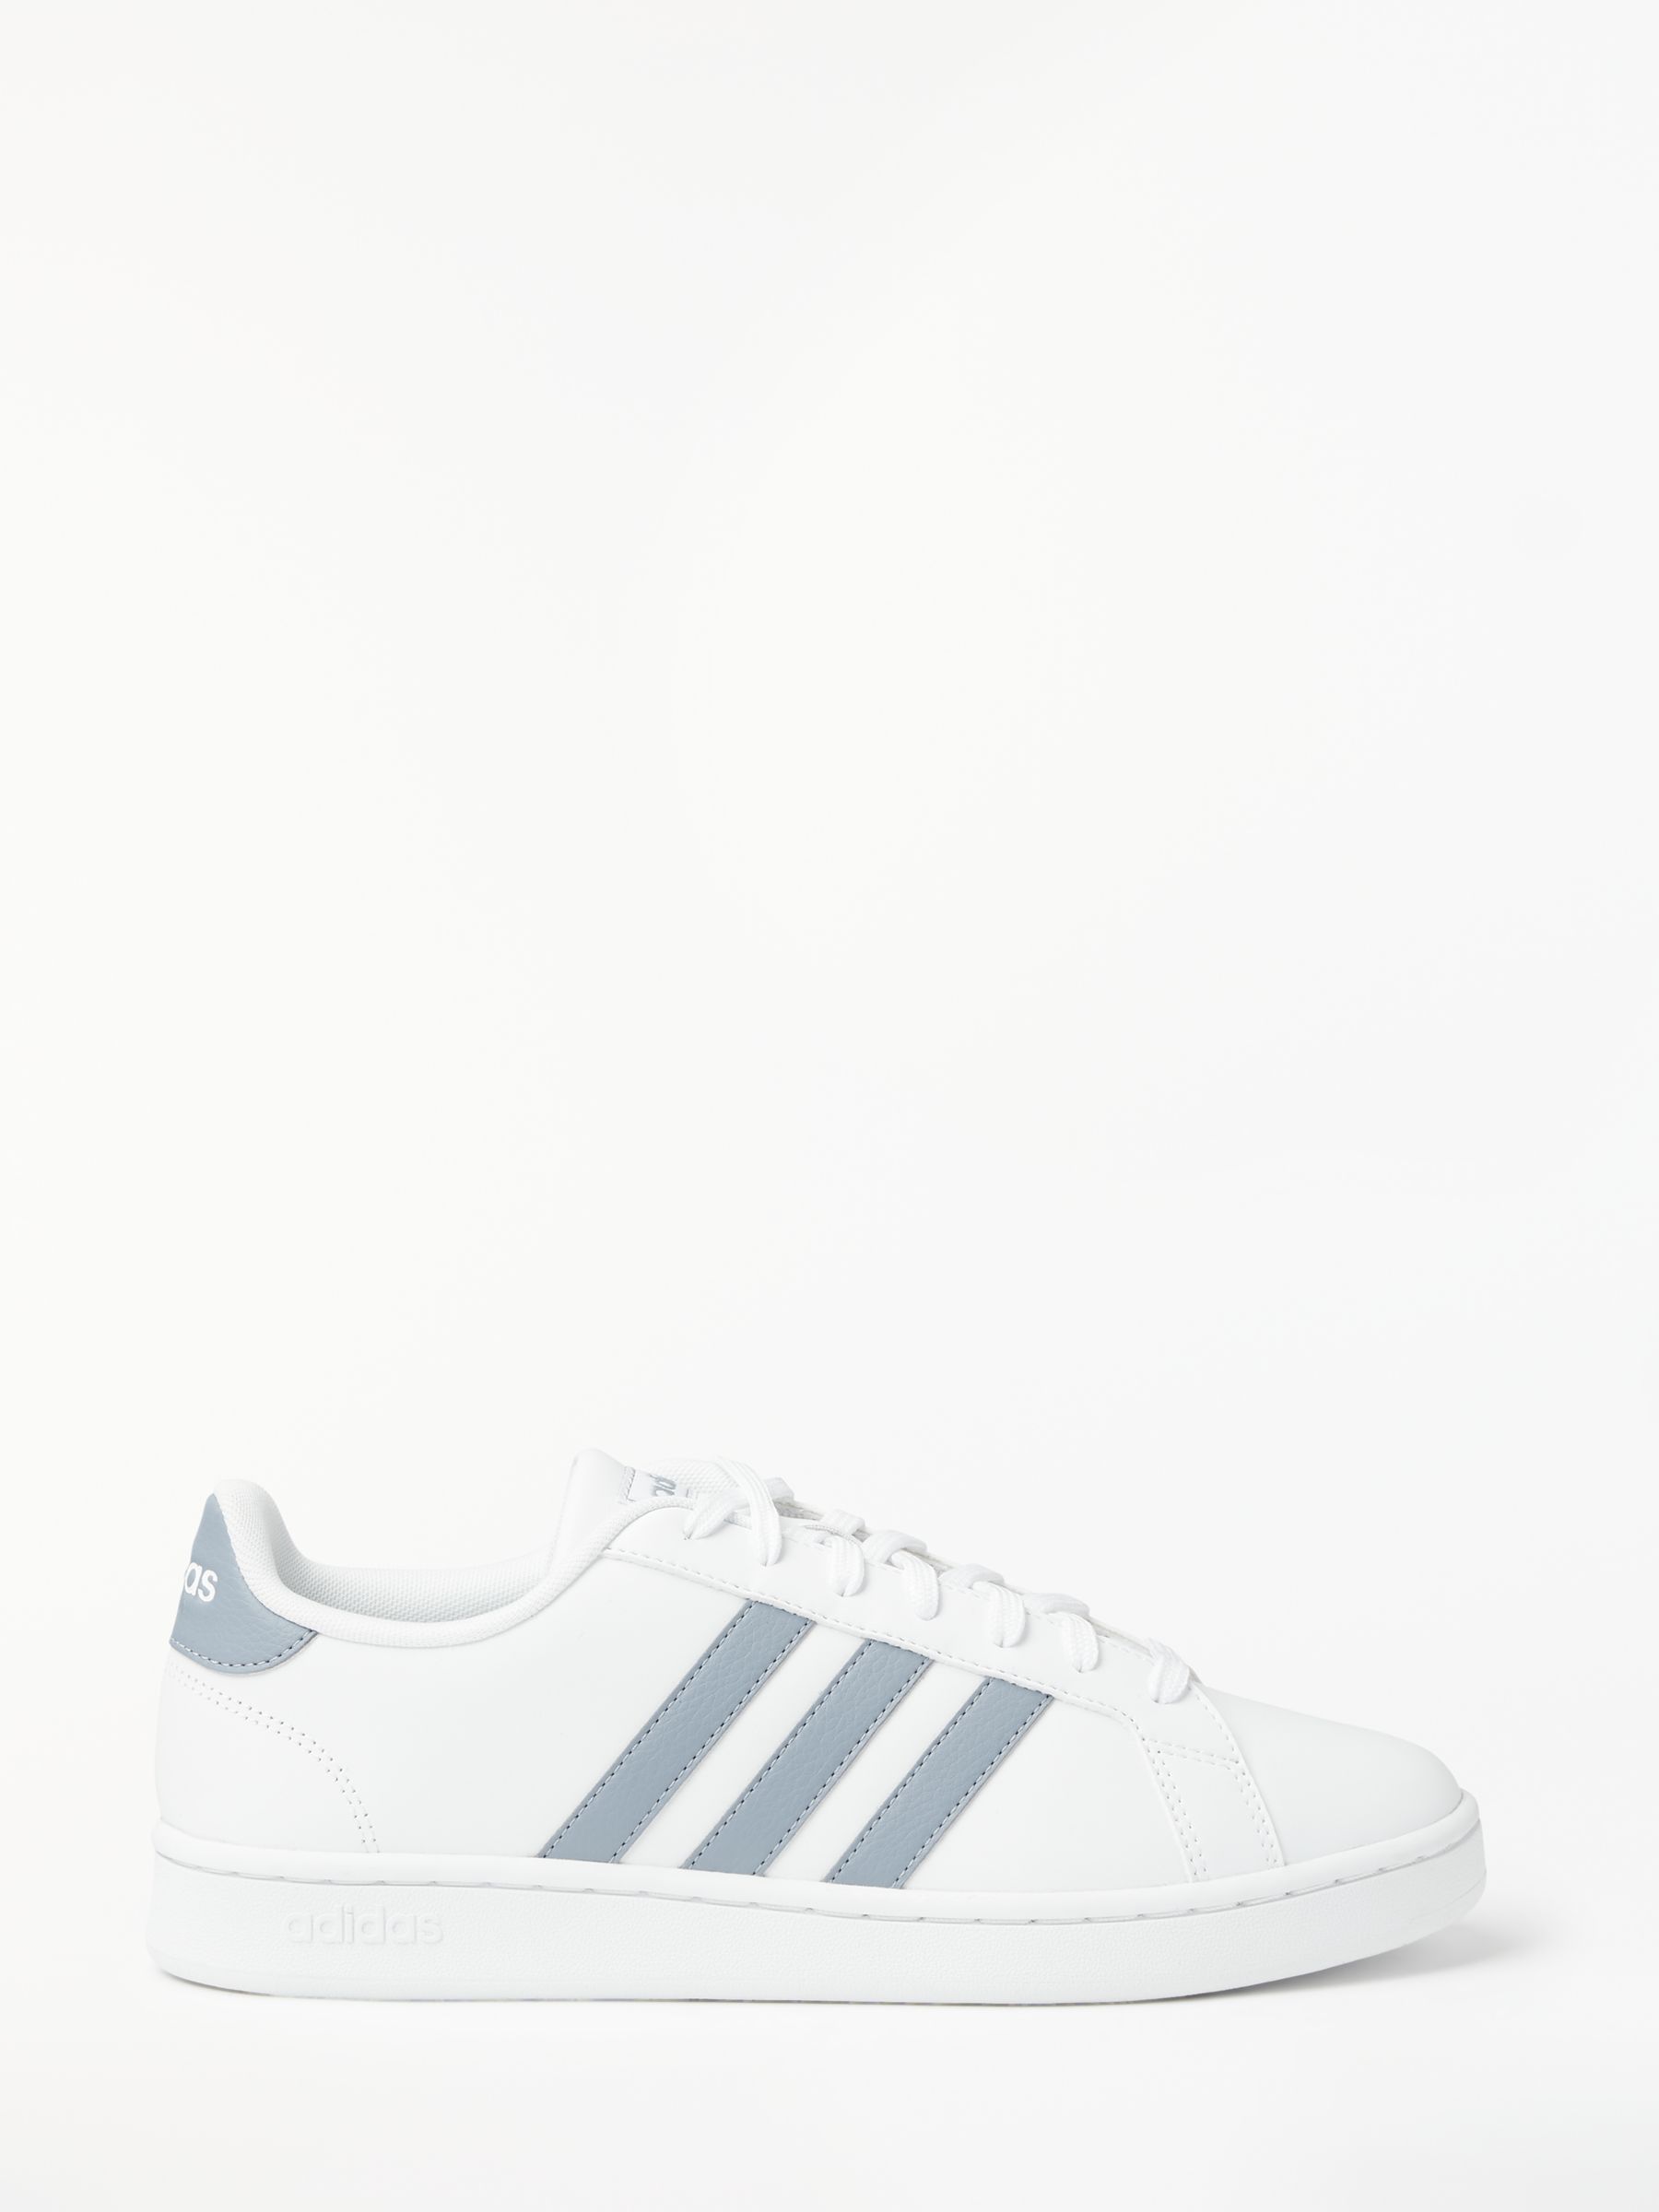 adidas grand court mens trainers